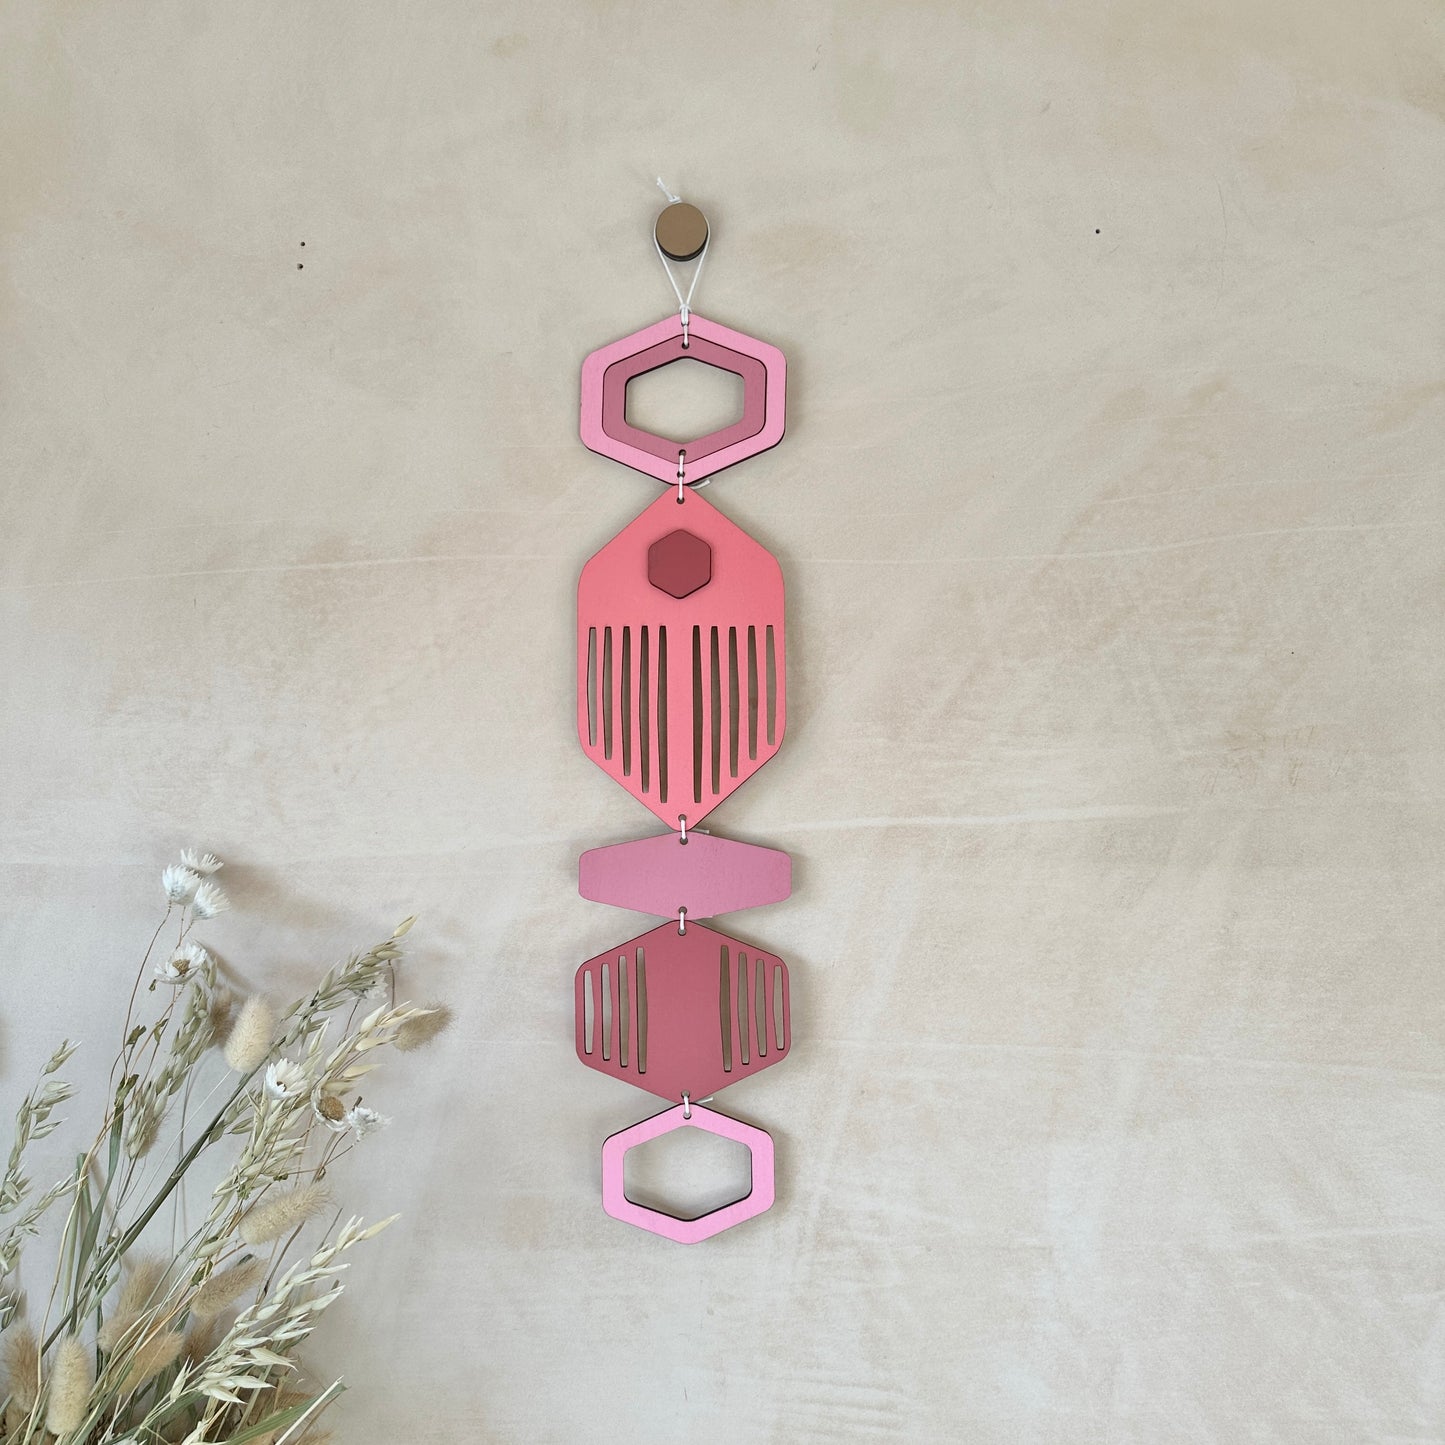 Hexagon Wall Hanging - Pink Bright Wall Art - Hand Painted Art - Home Gift For Her - New Home Decor Gift - Pink Wall Decor - New Home Gift